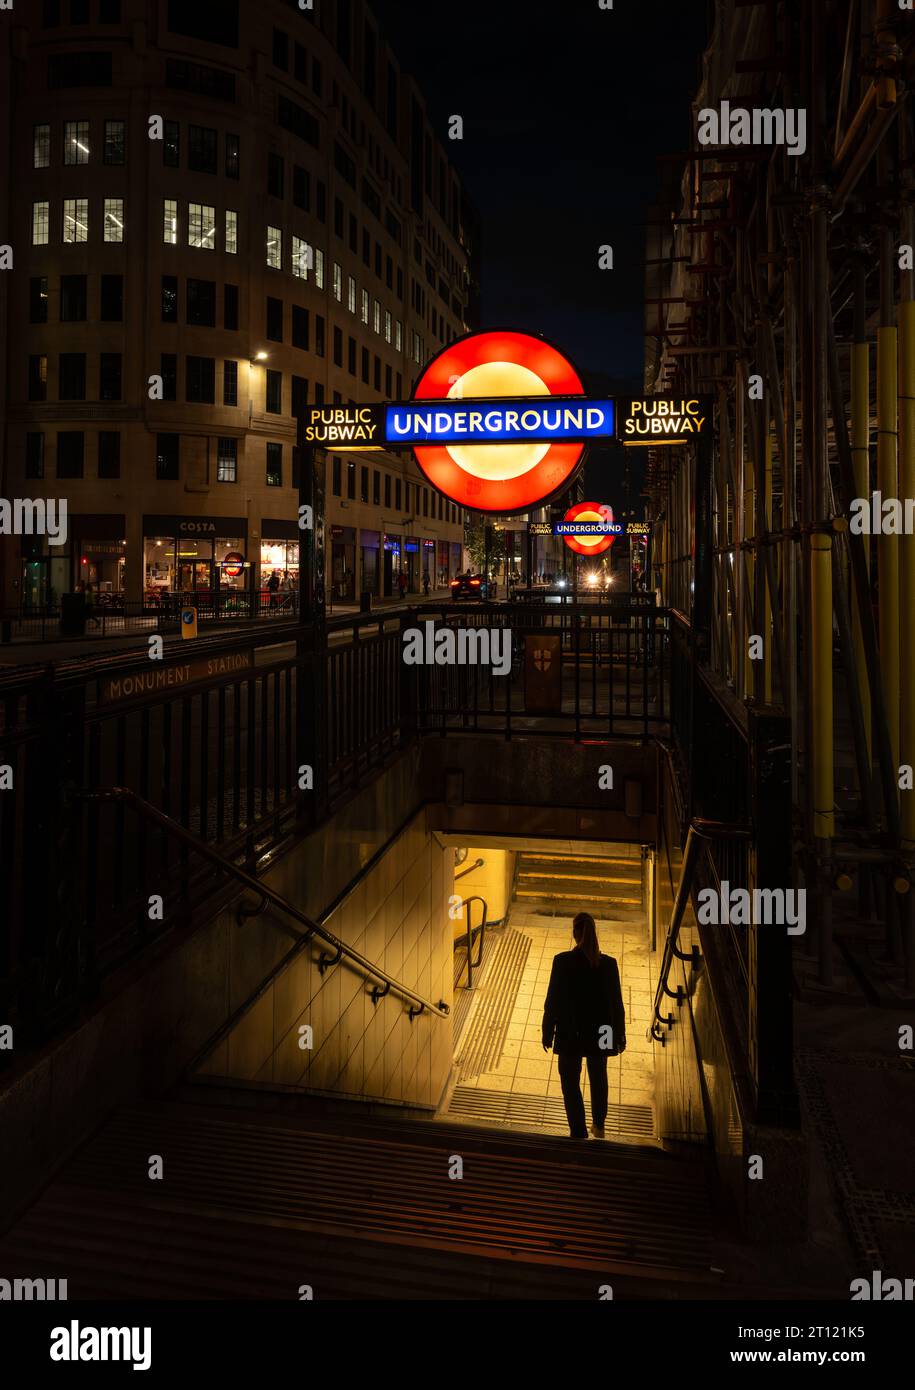 London, UK: Entrance to Monument tube station at night with illuminated London Underground sign and a person walking down the steps. Stock Photo